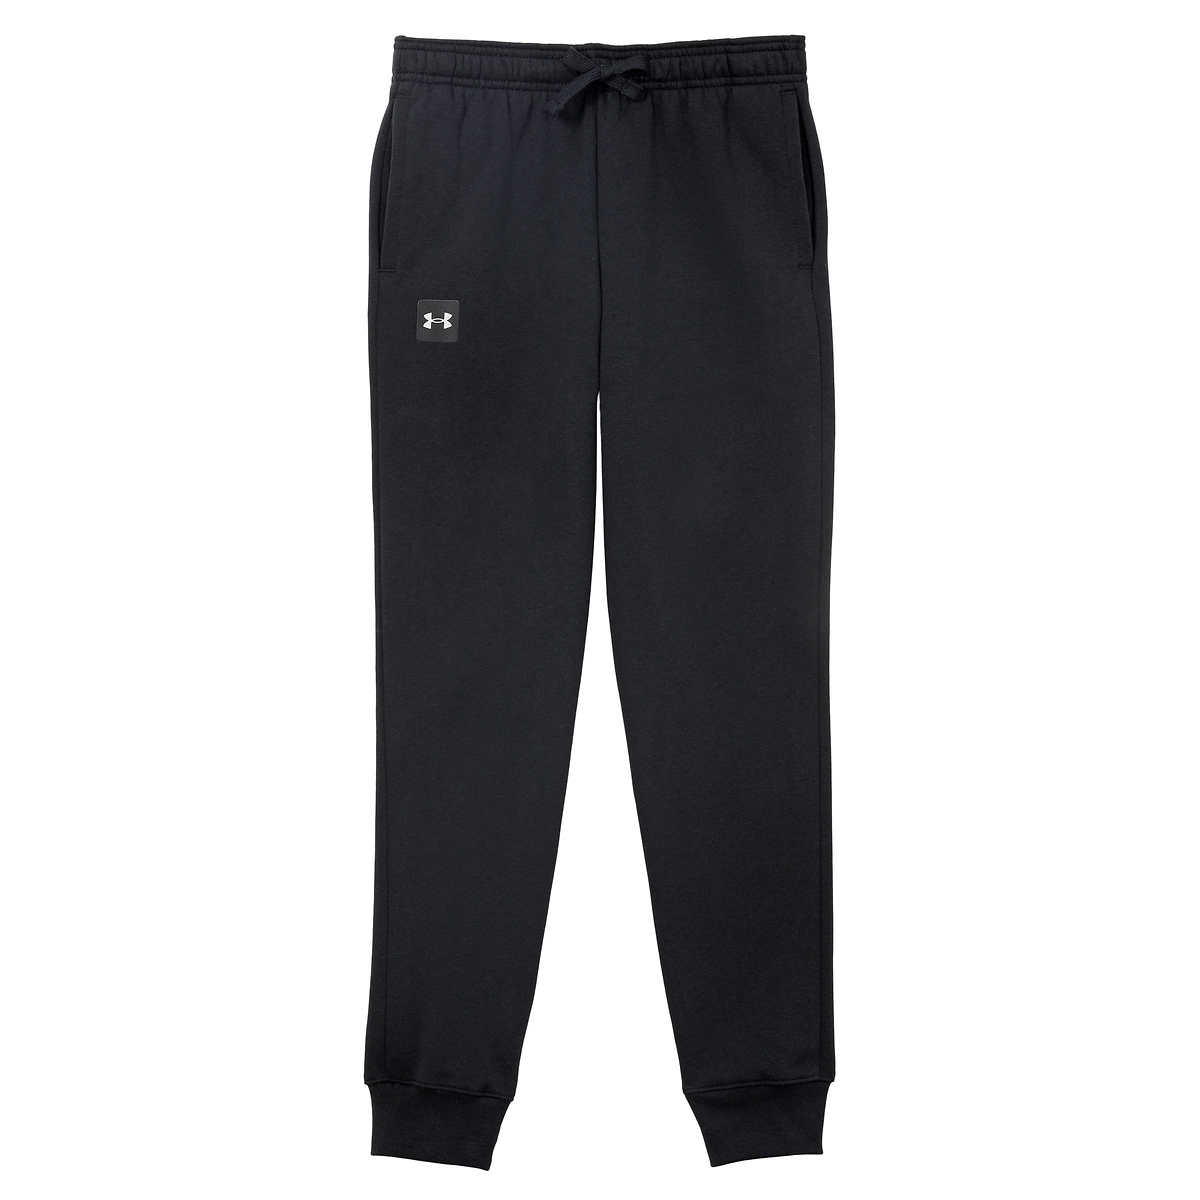  Under Armour Boys Hustle Fleece Pants , Black (001)/White ,  Youth Small : Clothing, Shoes & Jewelry